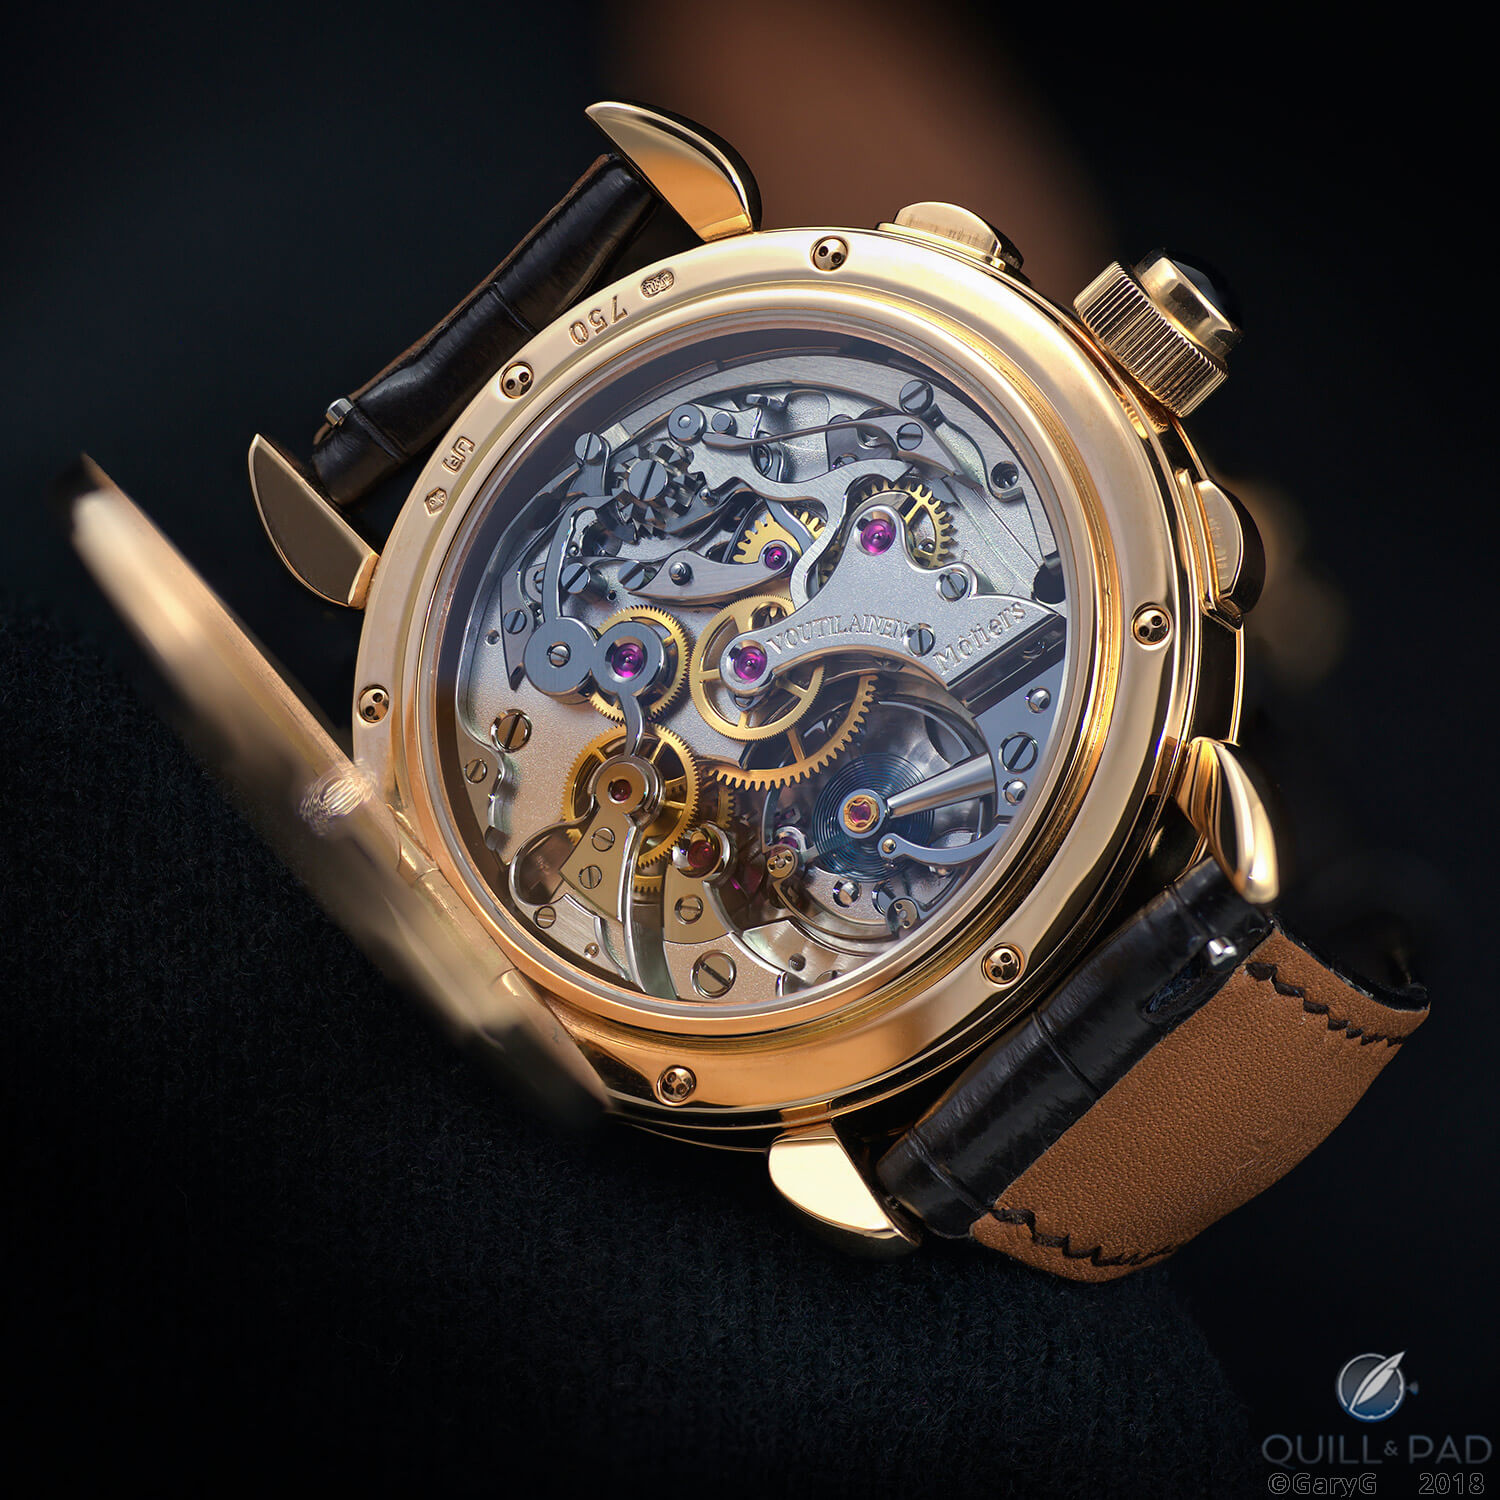 Movement view of the author’s Voutilainen Masterpiece Chronograph II